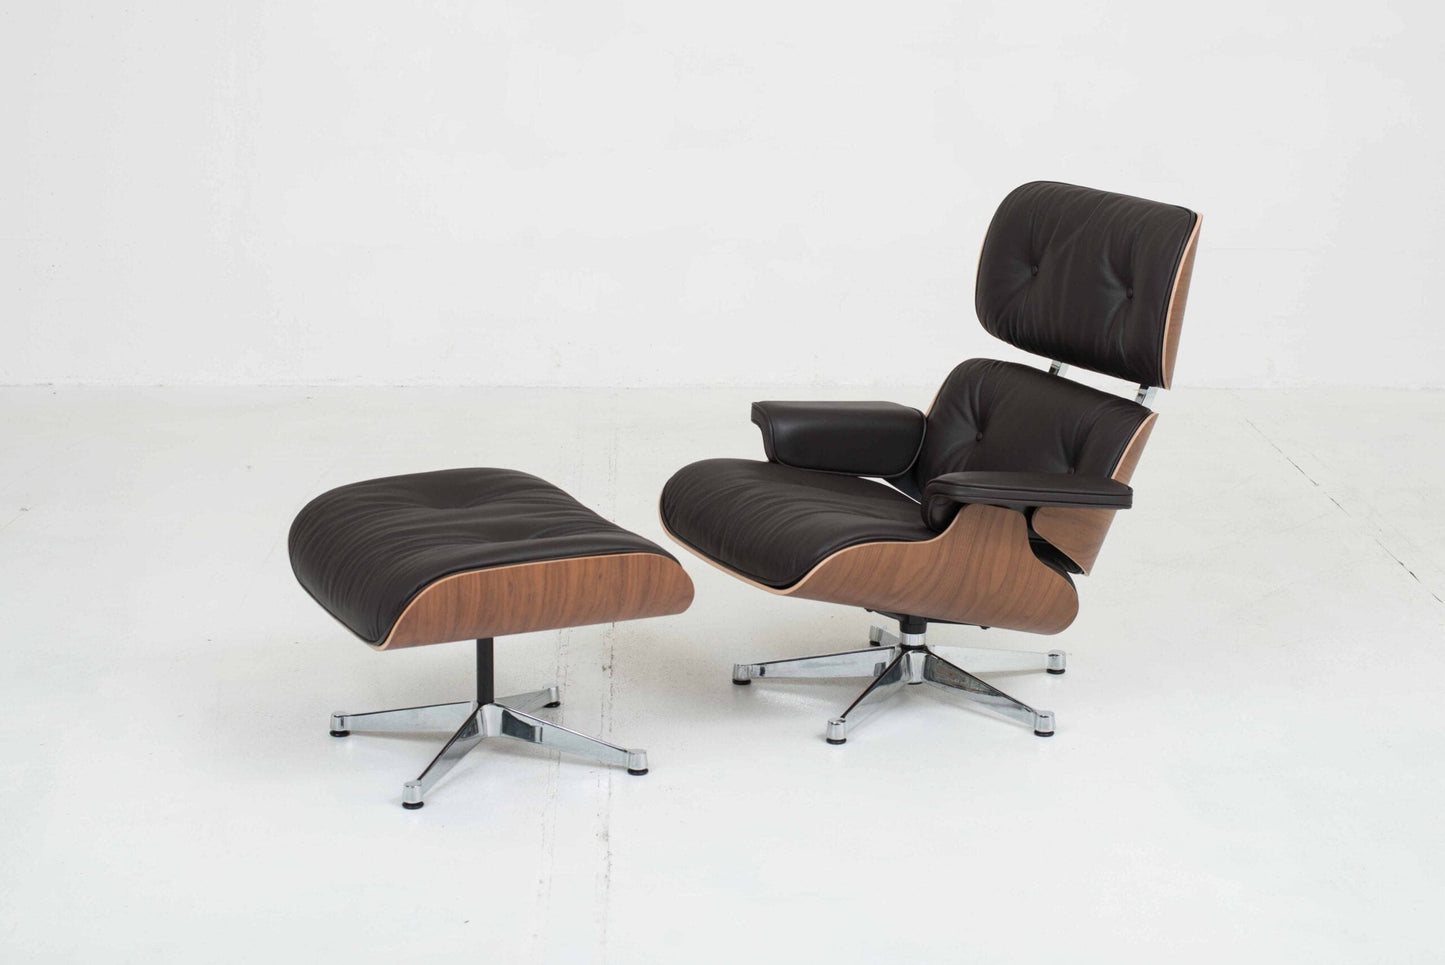 Vitra Lounge Chair by Charles and Ray Eames, XL Walnut Vintage